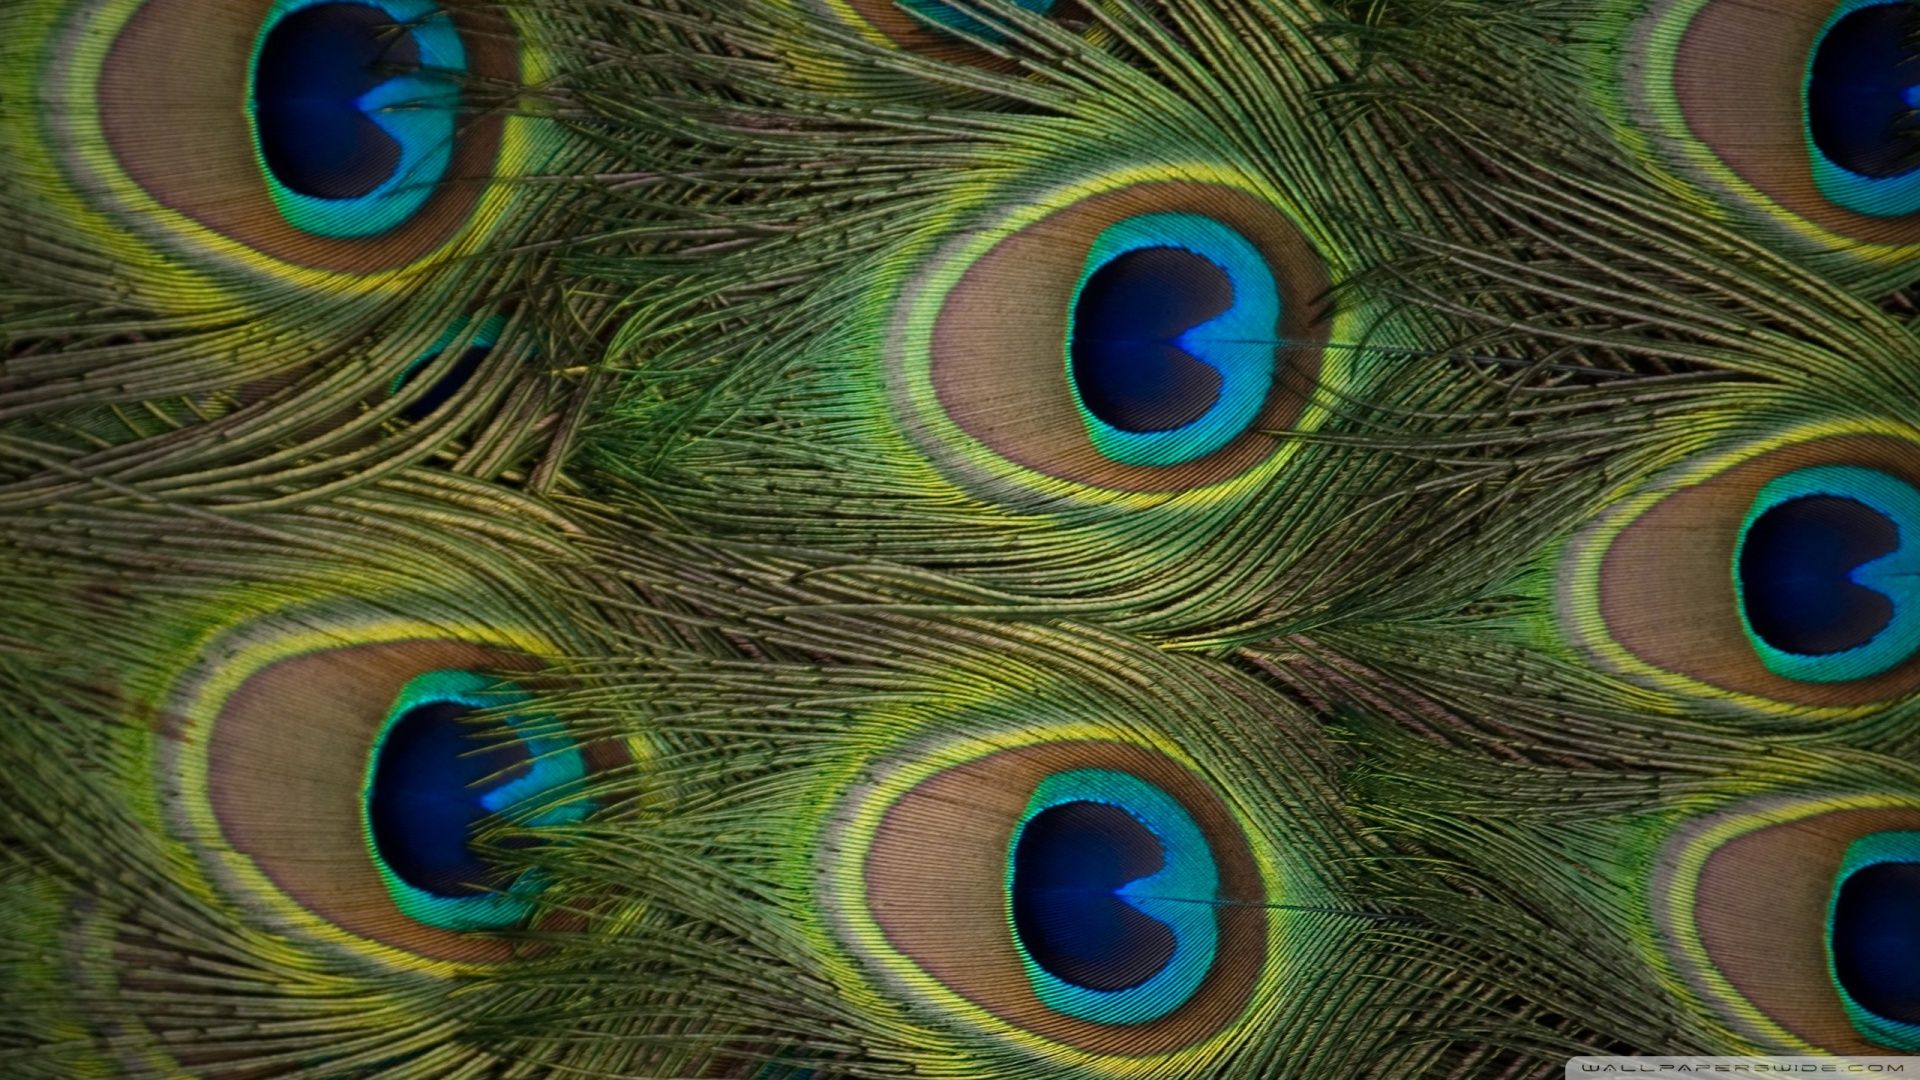 Download Peacock Feathers Wallpaper 1920x1080